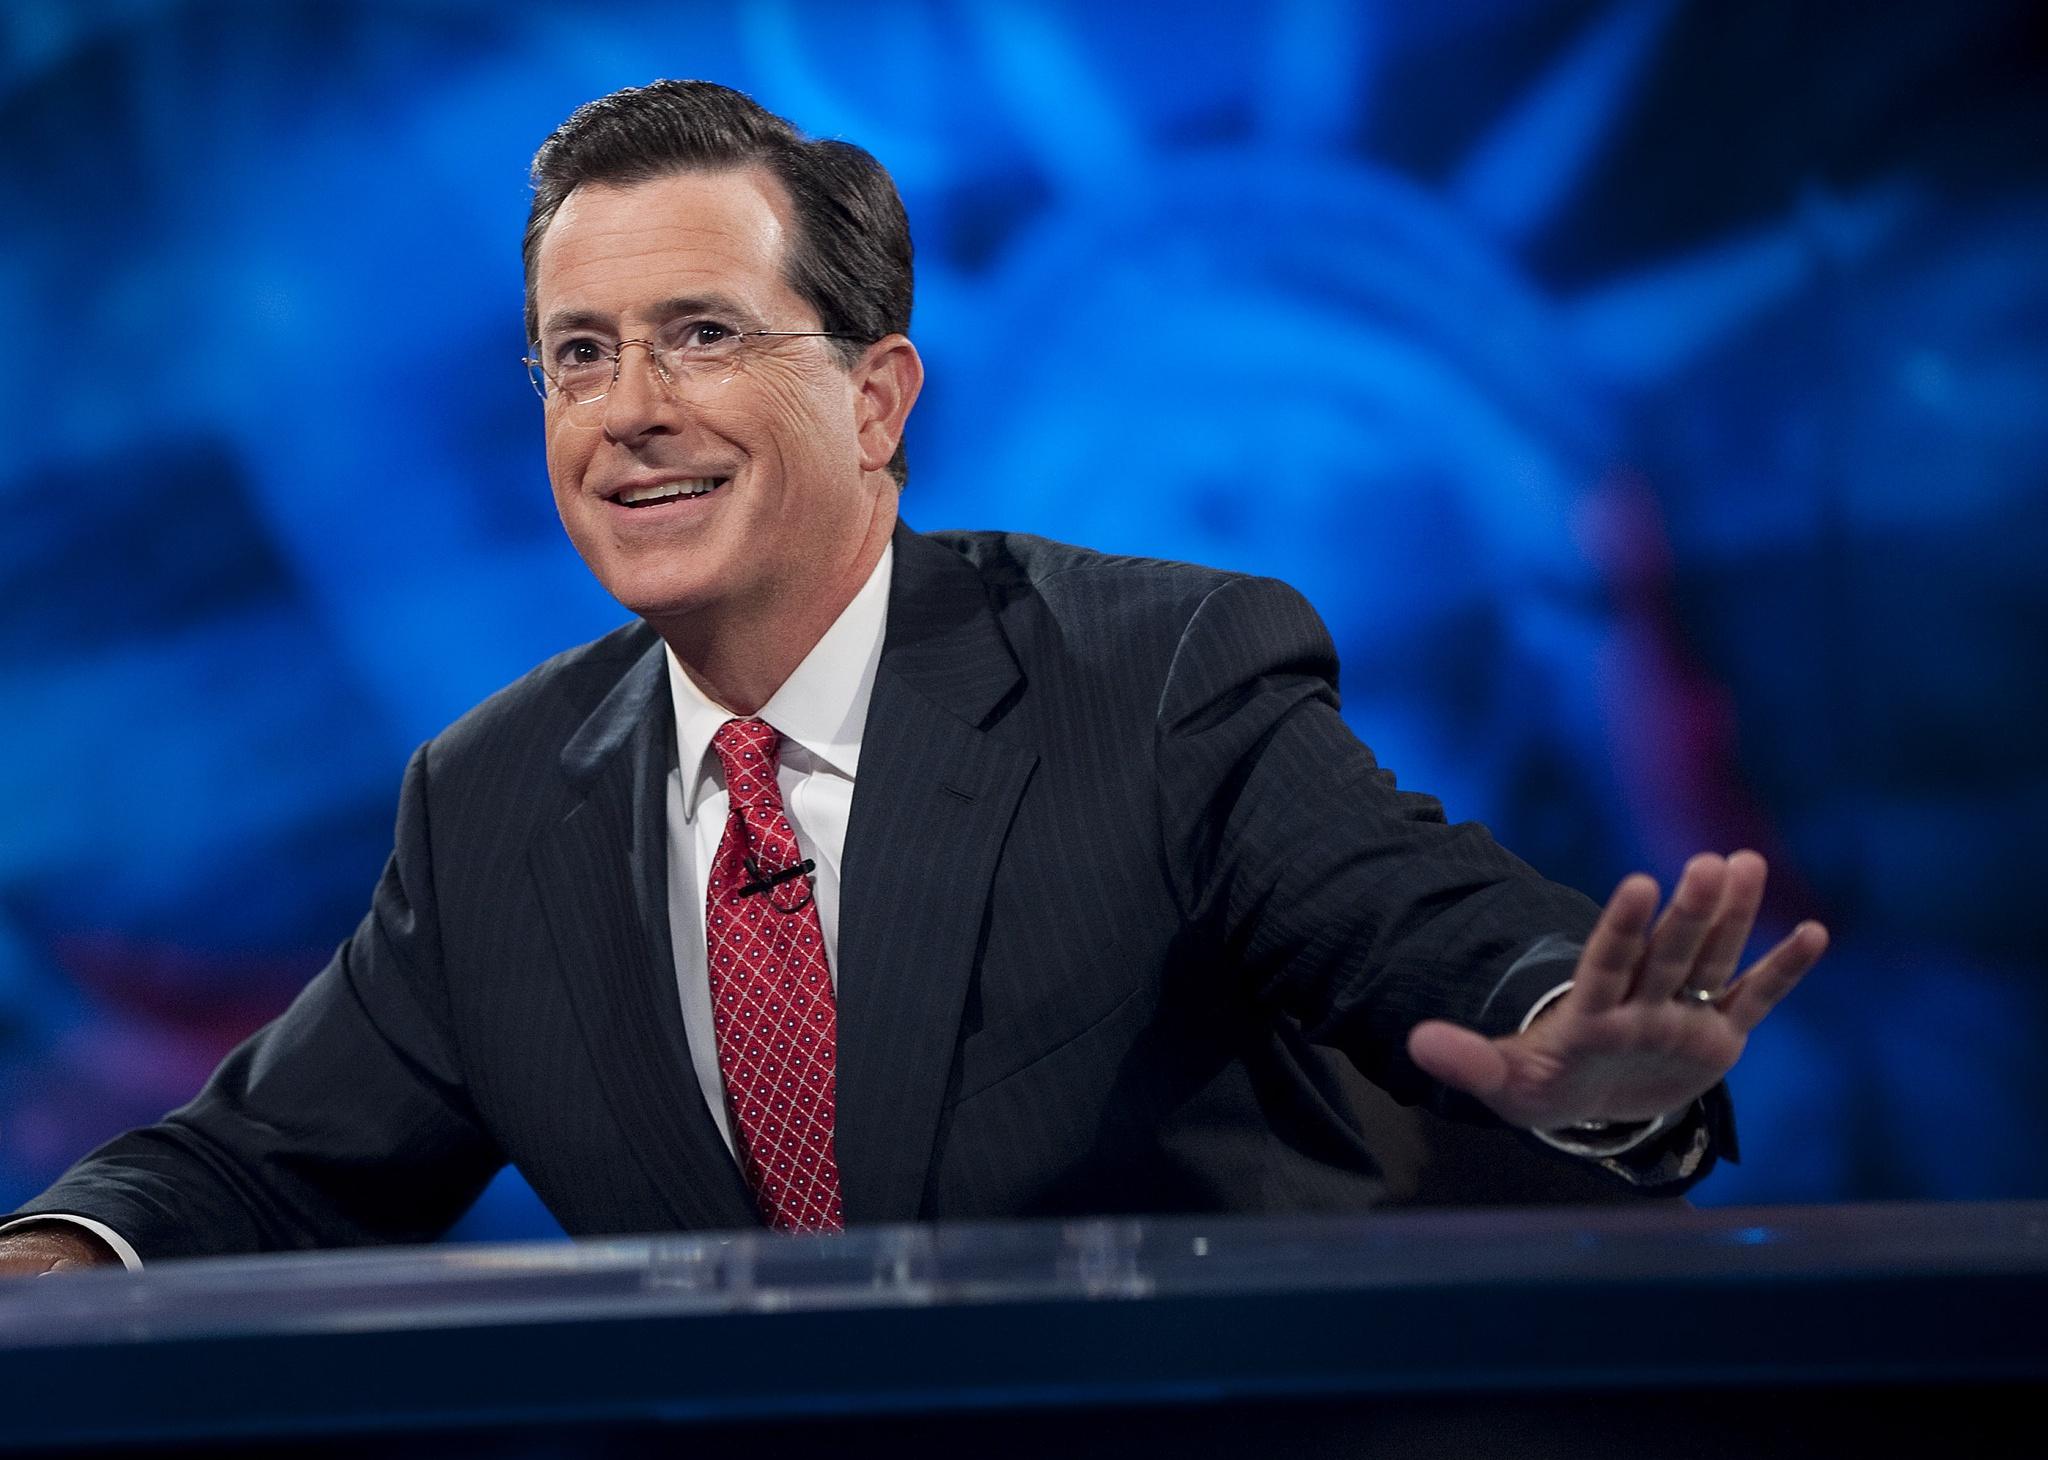 Stephen Colbert smiling at a desk in front of a blue background.